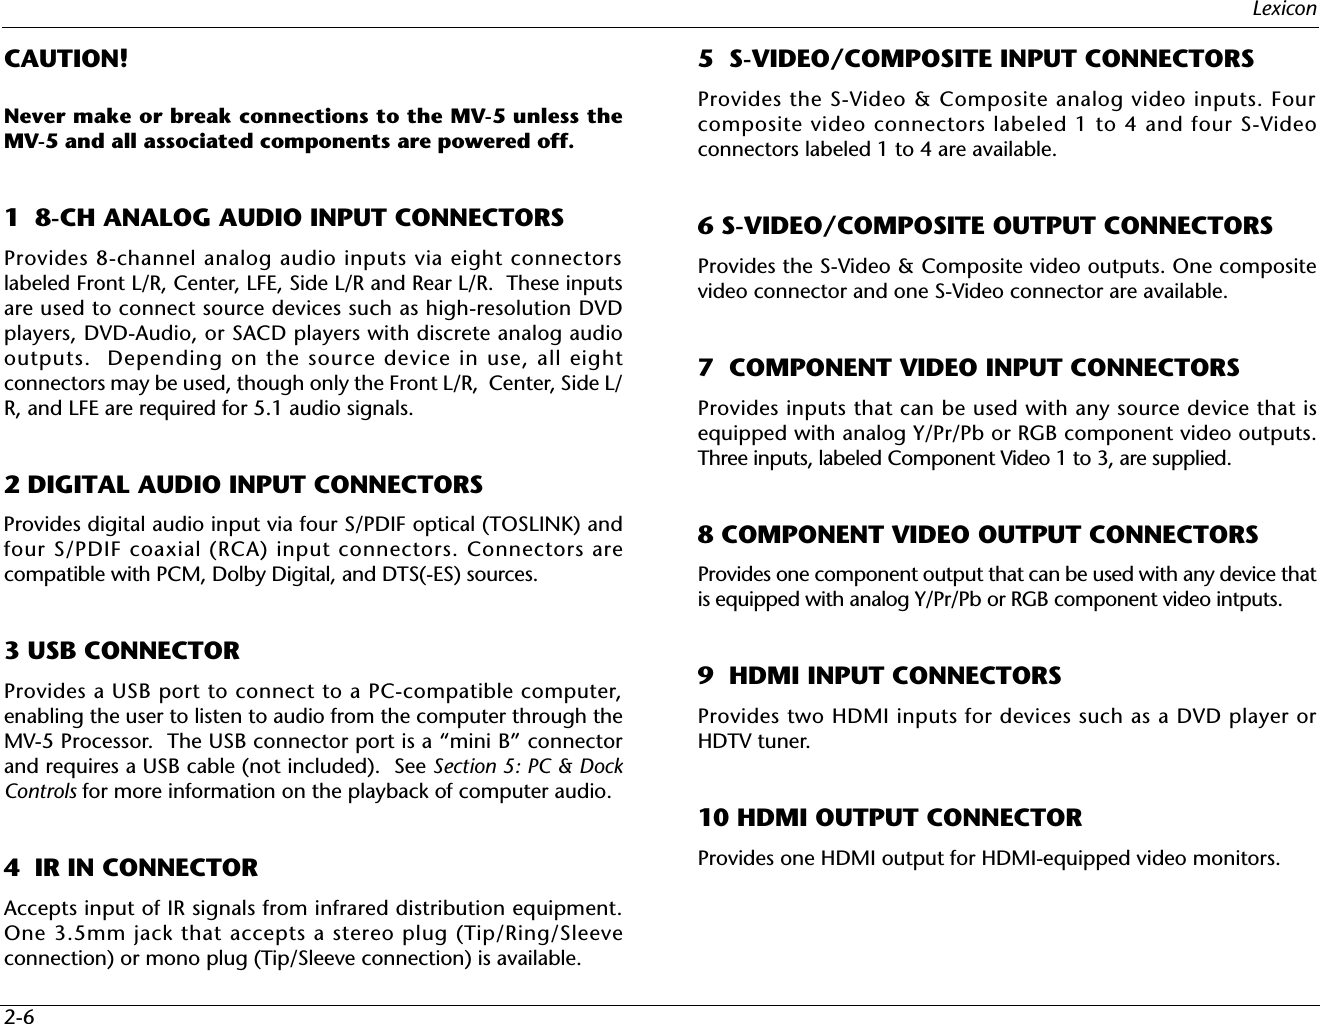 Lexicon2-6CAUTION! Never make or break connections to the MV-5 unless theMV-5 and all associated components are powered off.1  8-CH ANALOG AUDIO INPUT CONNECTORSProvides 8-channel analog audio inputs via eight connectorslabeled Front L/R, Center, LFE, Side L/R and Rear L/R.  These inputsare used to connect source devices such as high-resolution DVDplayers, DVD-Audio, or SACD players with discrete analog audiooutputs.  Depending on the source device in use, all eightconnectors may be used, though only the Front L/R,  Center, Side L/R, and LFE are required for 5.1 audio signals.2 DIGITAL AUDIO INPUT CONNECTORS Provides digital audio input via four S/PDIF optical (TOSLINK) andfour S/PDIF coaxial (RCA) input connectors. Connectors arecompatible with PCM, Dolby Digital, and DTS(-ES) sources.3 USB CONNECTORProvides a USB port to connect to a PC-compatible computer,enabling the user to listen to audio from the computer through theMV-5 Processor.  The USB connector port is a “mini B” connectorand requires a USB cable (not included).  See Section 5: PC &amp; DockControls for more information on the playback of computer audio.4  IR IN CONNECTORAccepts input of IR signals from infrared distribution equipment.One 3.5mm jack that accepts a stereo plug (Tip/Ring/Sleeveconnection) or mono plug (Tip/Sleeve connection) is available.5  S-VIDEO/COMPOSITE INPUT CONNECTORSProvides the S-Video &amp; Composite analog video inputs. Fourcomposite video connectors labeled 1 to 4 and four S-Videoconnectors labeled 1 to 4 are available.6 S-VIDEO/COMPOSITE OUTPUT CONNECTORSProvides the S-Video &amp; Composite video outputs. One compositevideo connector and one S-Video connector are available.7  COMPONENT VIDEO INPUT CONNECTORSProvides inputs that can be used with any source device that isequipped with analog Y/Pr/Pb or RGB component video outputs.Three inputs, labeled Component Video 1 to 3, are supplied.8 COMPONENT VIDEO OUTPUT CONNECTORSProvides one component output that can be used with any device thatis equipped with analog Y/Pr/Pb or RGB component video intputs.  9  HDMI INPUT CONNECTORSProvides two HDMI inputs for devices such as a DVD player orHDTV tuner.10 HDMI OUTPUT CONNECTORProvides one HDMI output for HDMI-equipped video monitors.